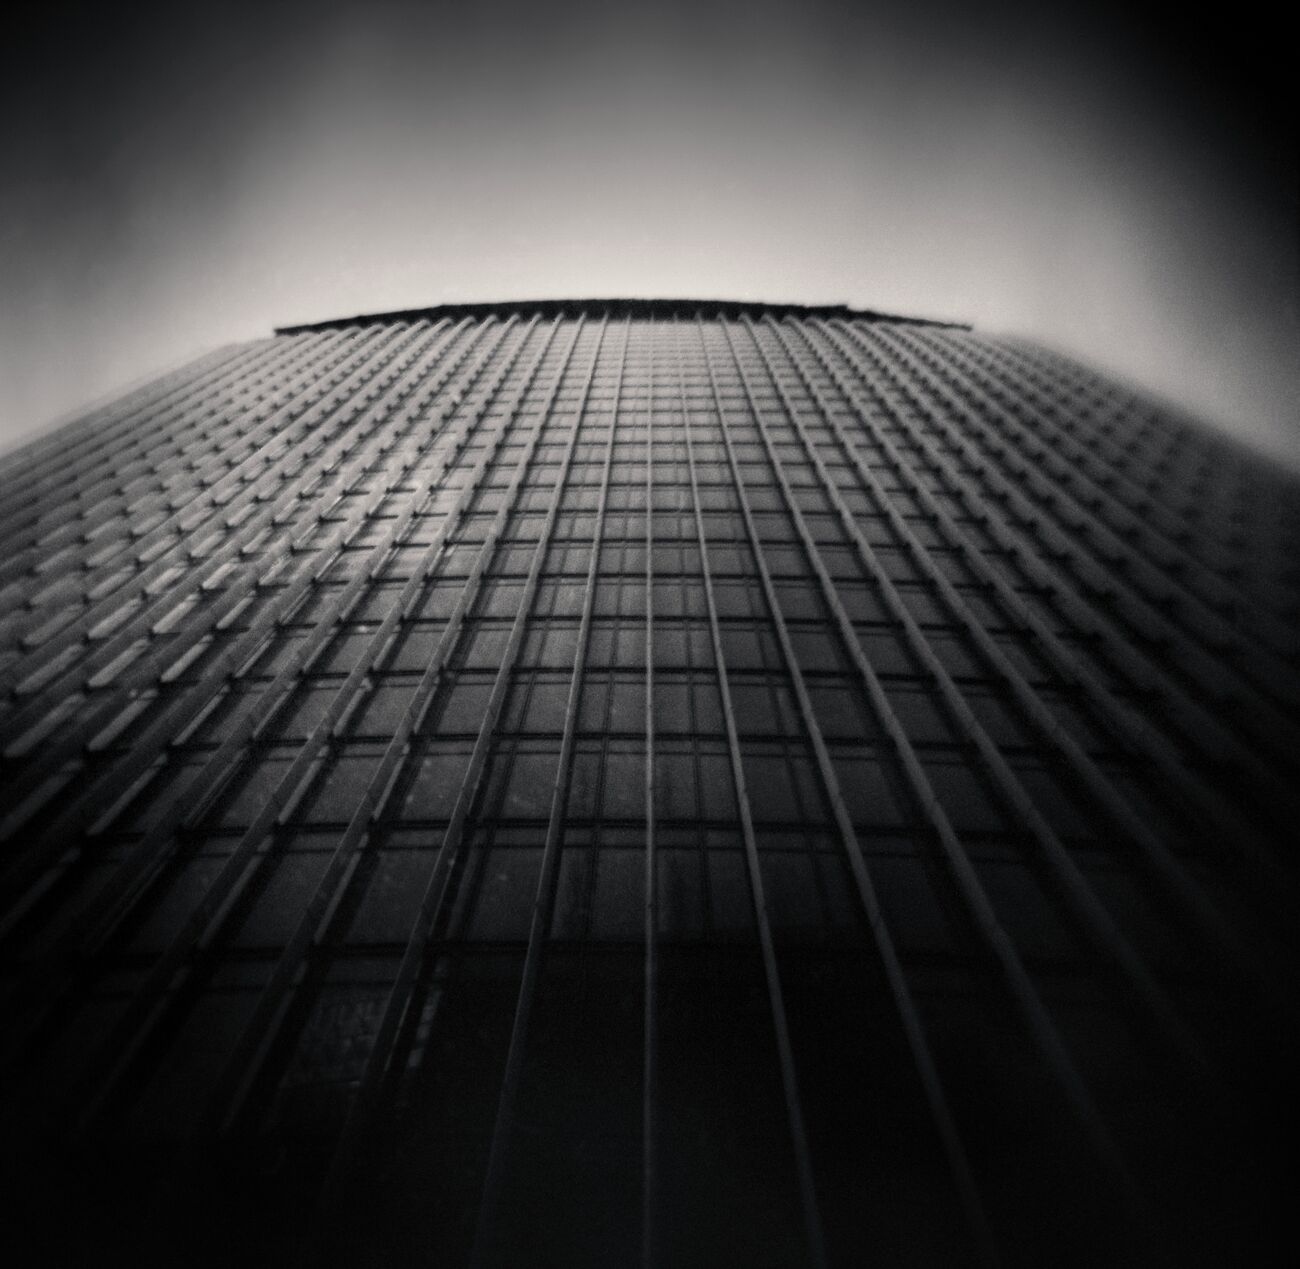 20 Fenchurch Street (The Walkie-Talkie), The City, London, England. April 2014. Ref-1360 - Denis Olivier Photography